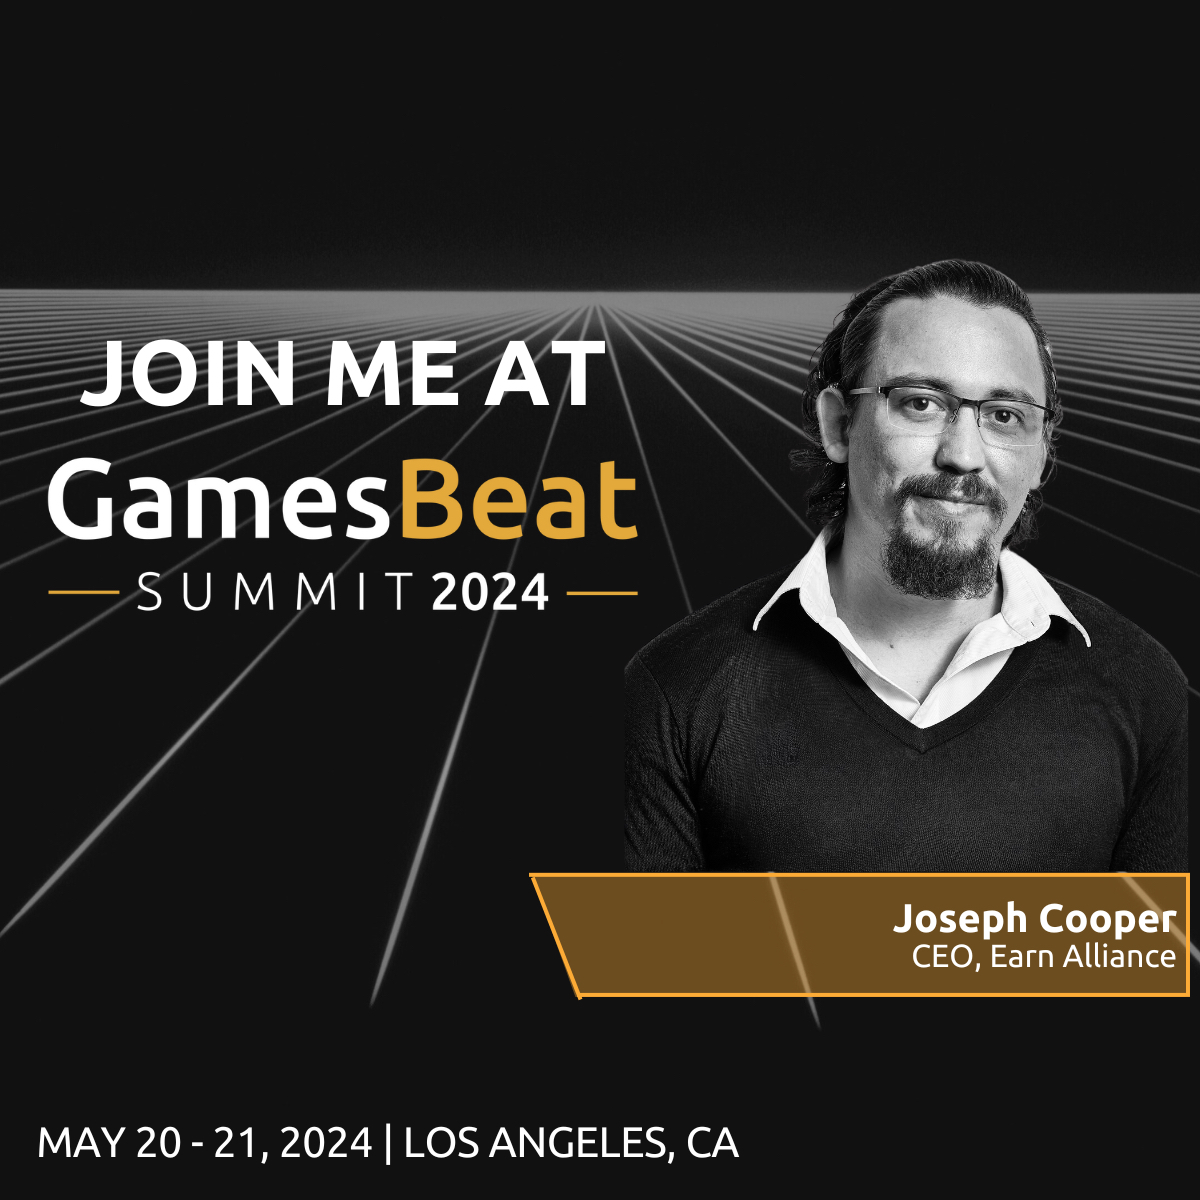 📢 Hey, Allies! Our CEO @codingcoop will be speaking at @GamesBeat today about The Future of Web3 Games! ⏰ Make sure to catch up his panel at 2:00PM PDT 📍 Los Angeles, CA